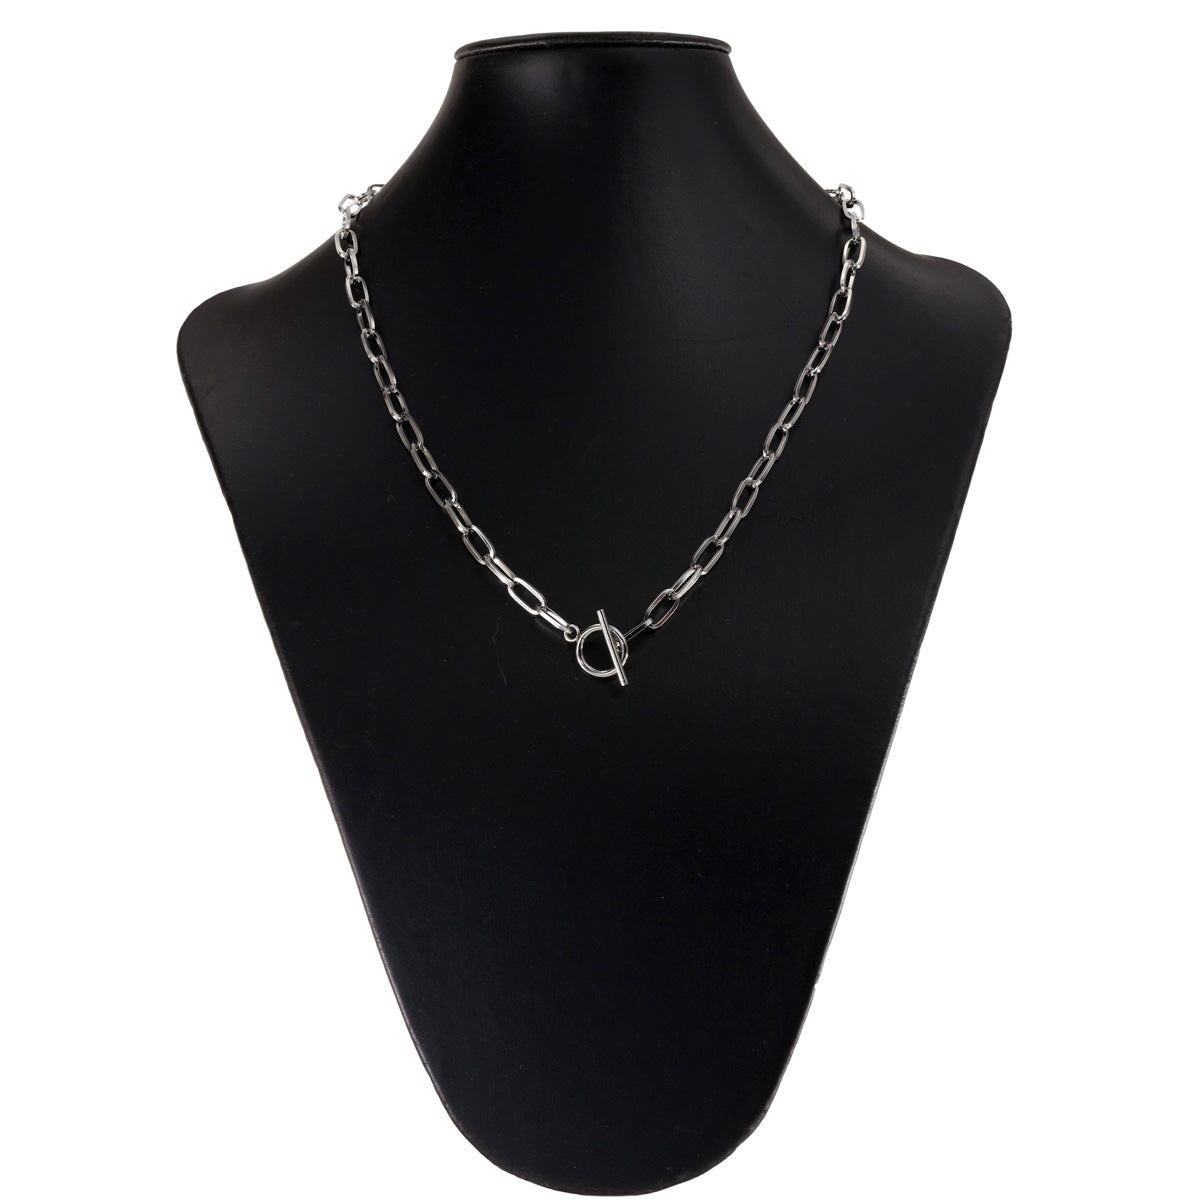 Cable chain necklace (steel) 51cm